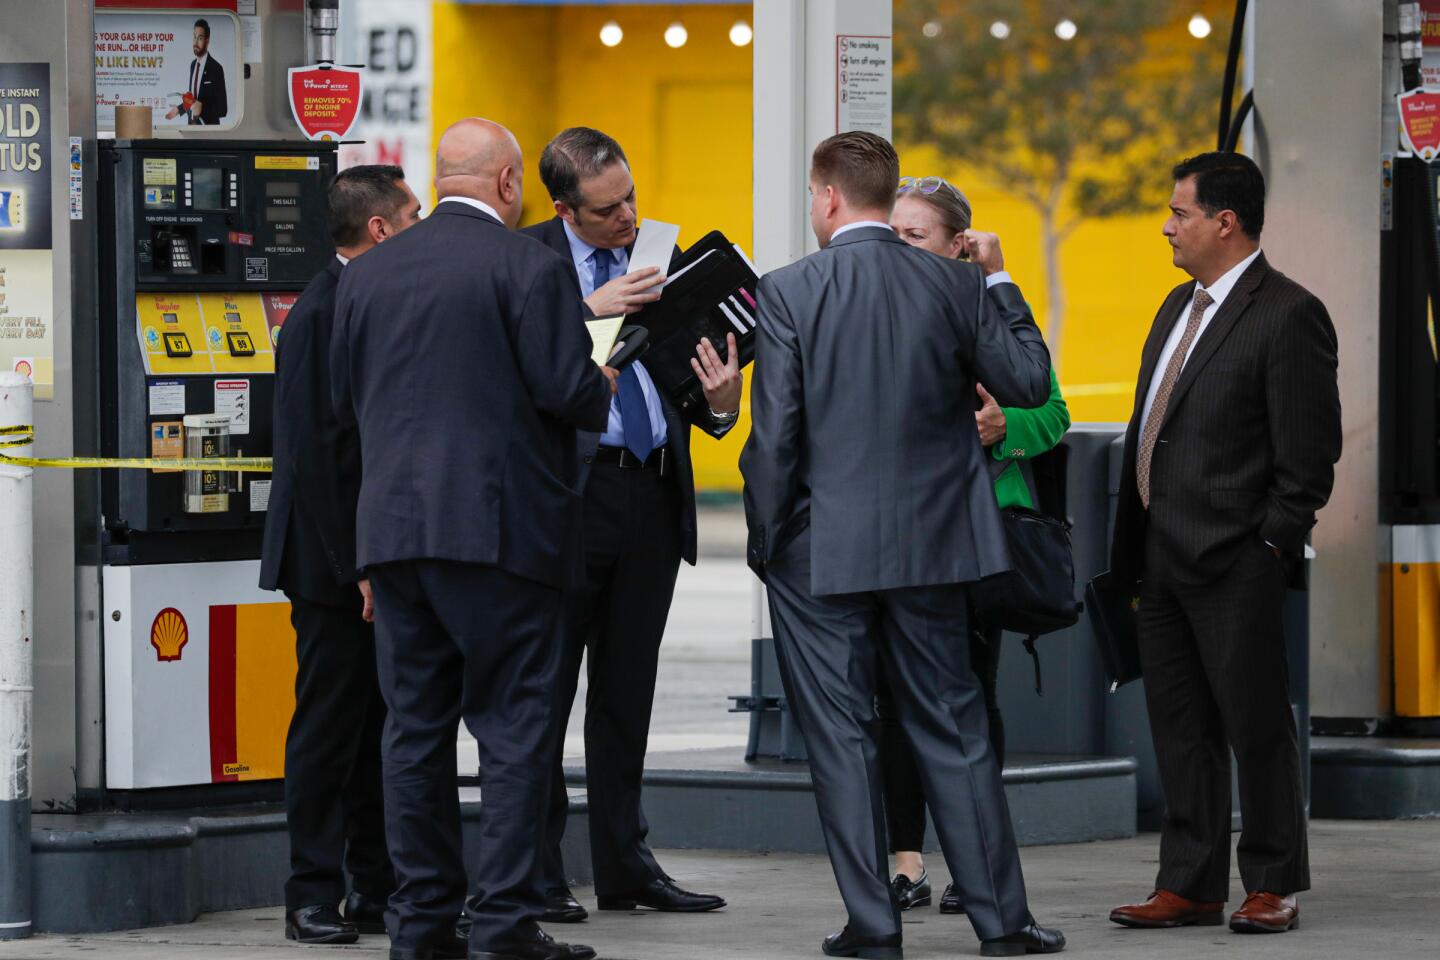 L.A. detectives confer at a gas station where two people were wounded, one fatally, in a shooting in North Hollywood.